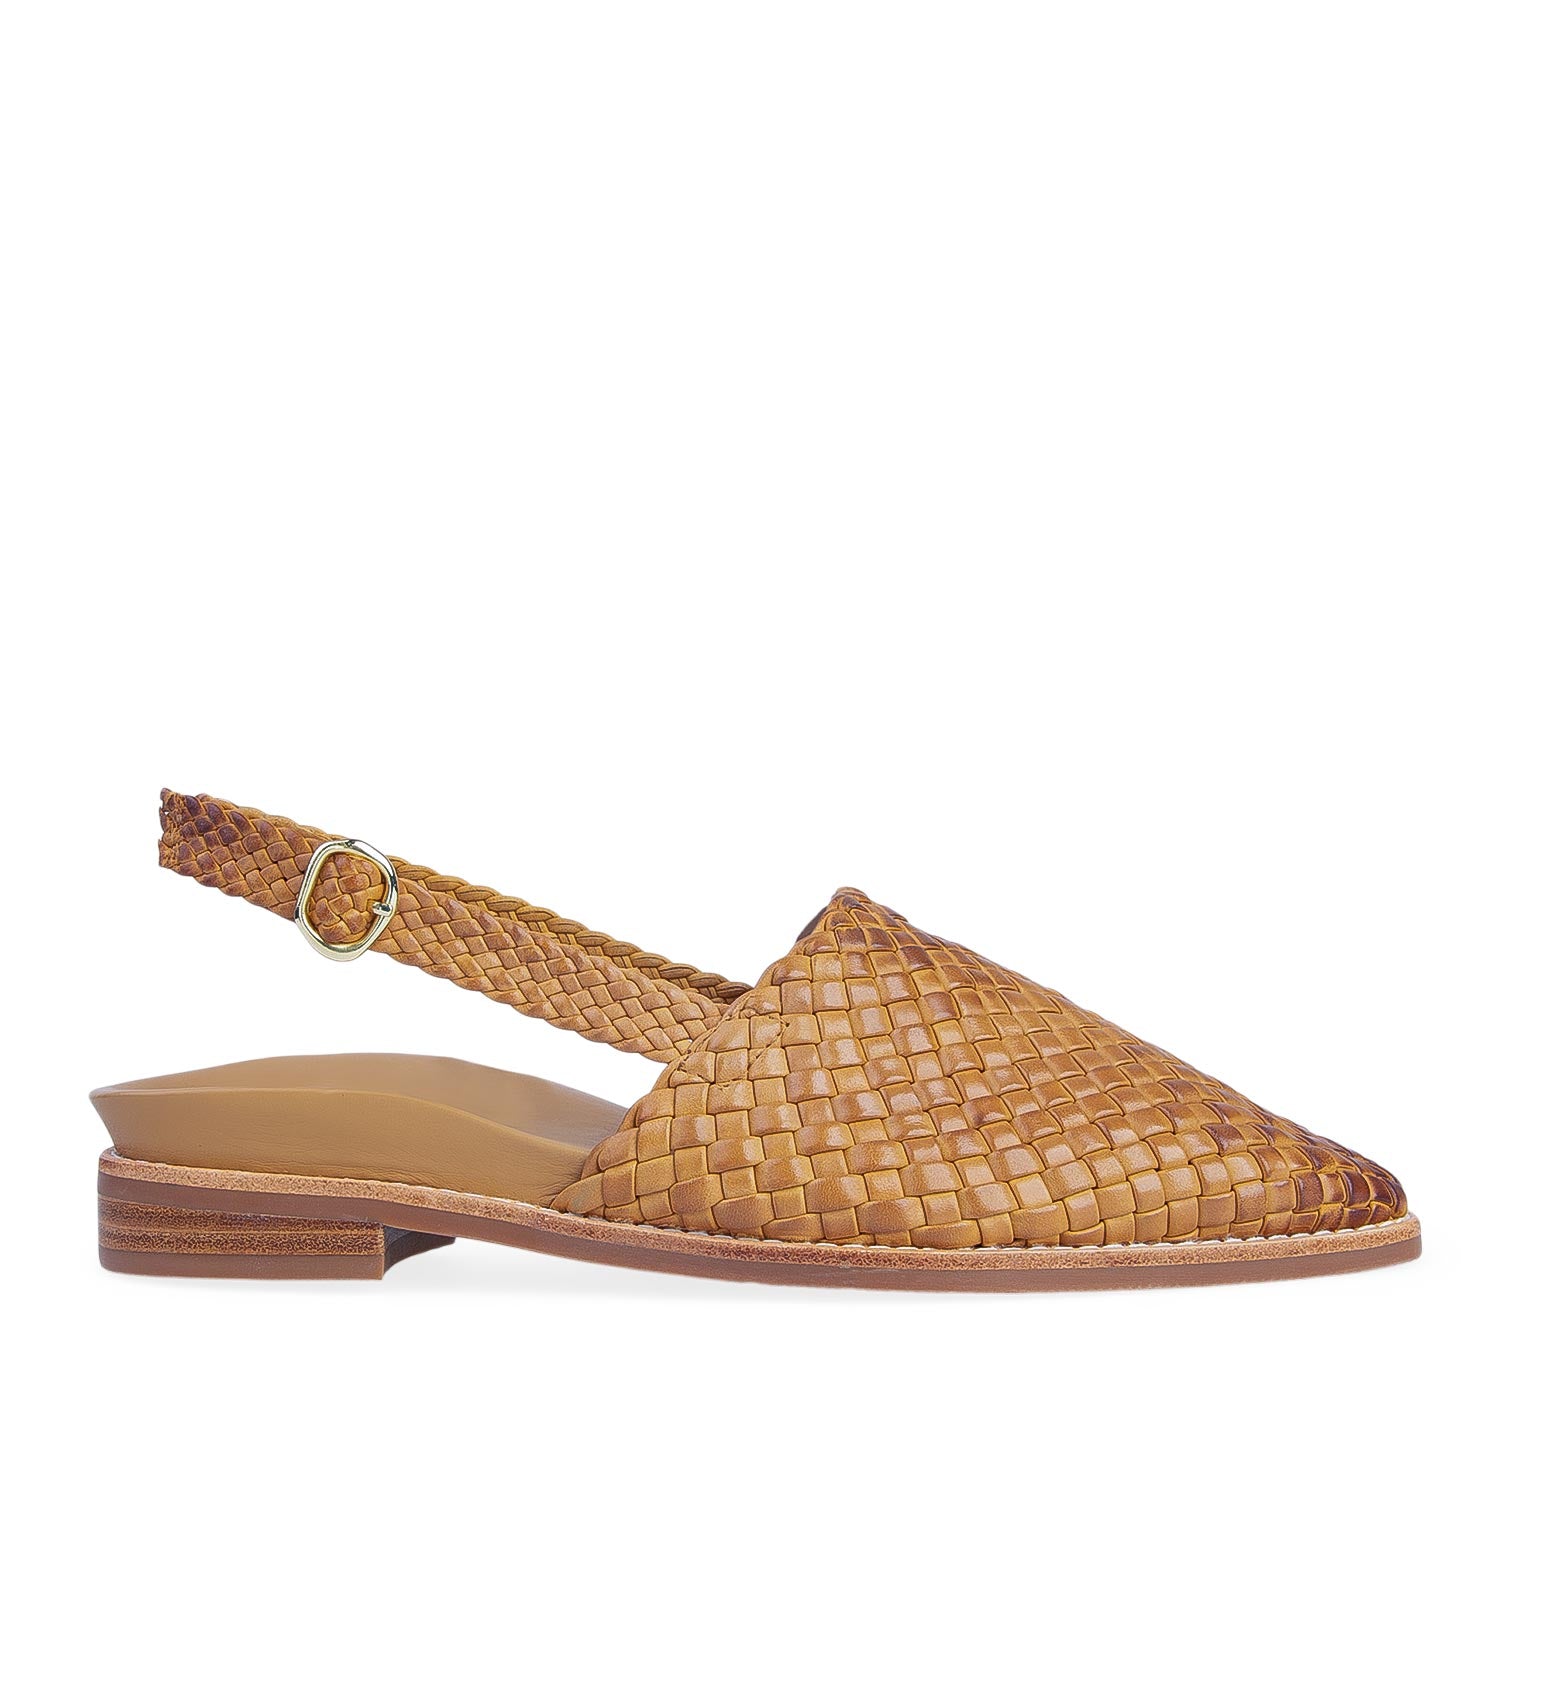 Junco Tan Leather Woven Sandals | Bared Footwear